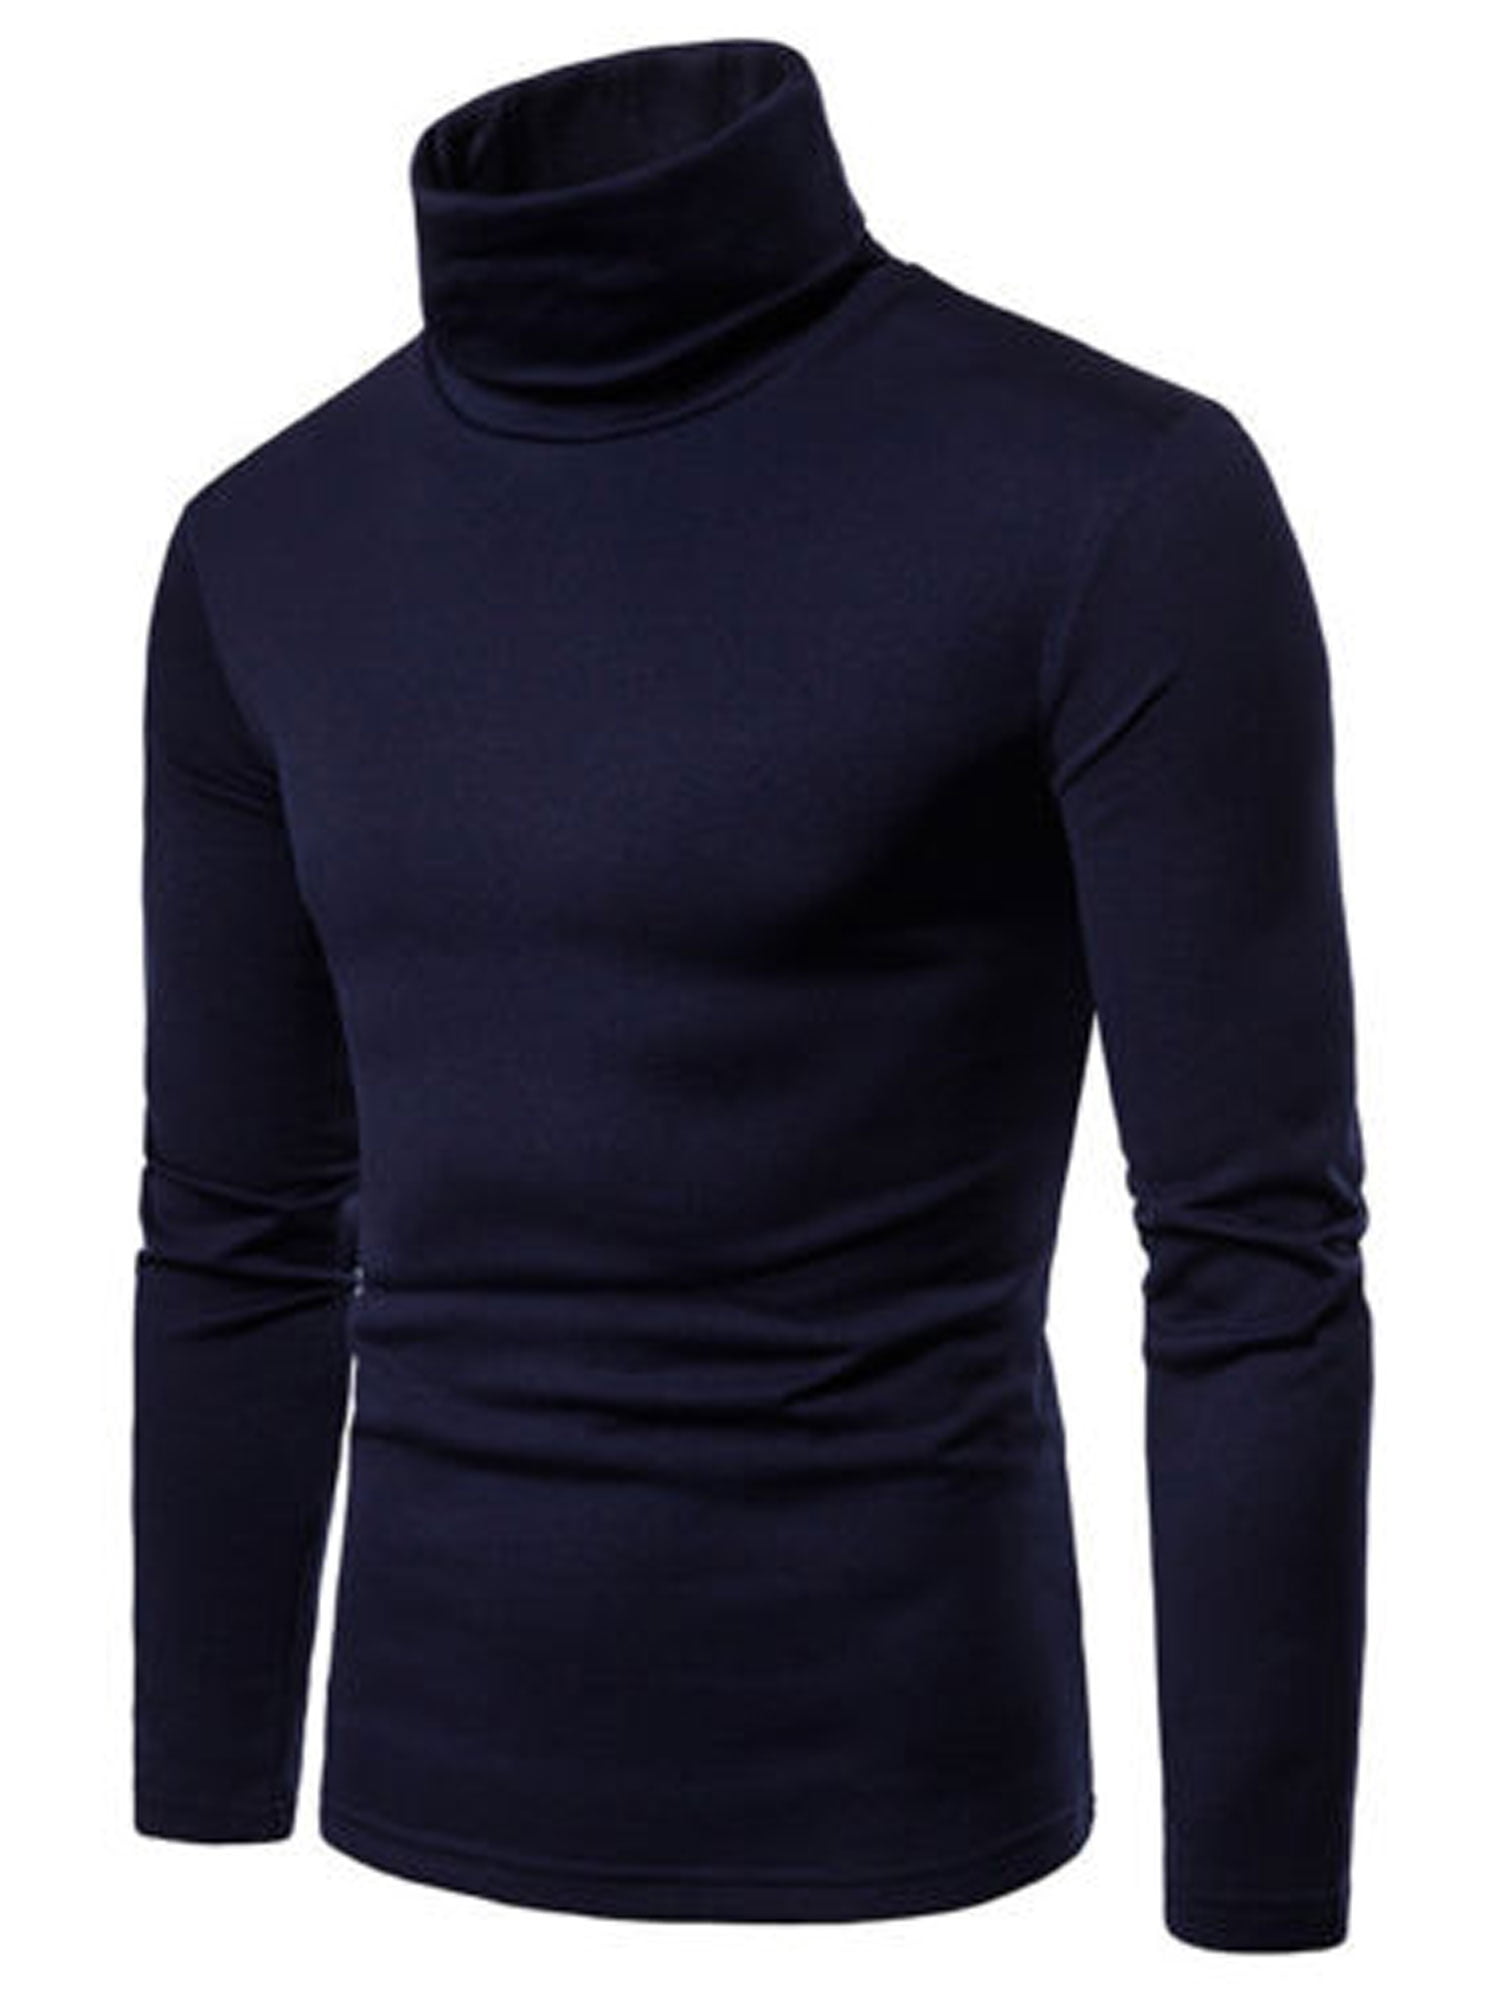 Men Thermal Turtle Neck Pullover Knitted Jumper Tops Sweater Shirt ...